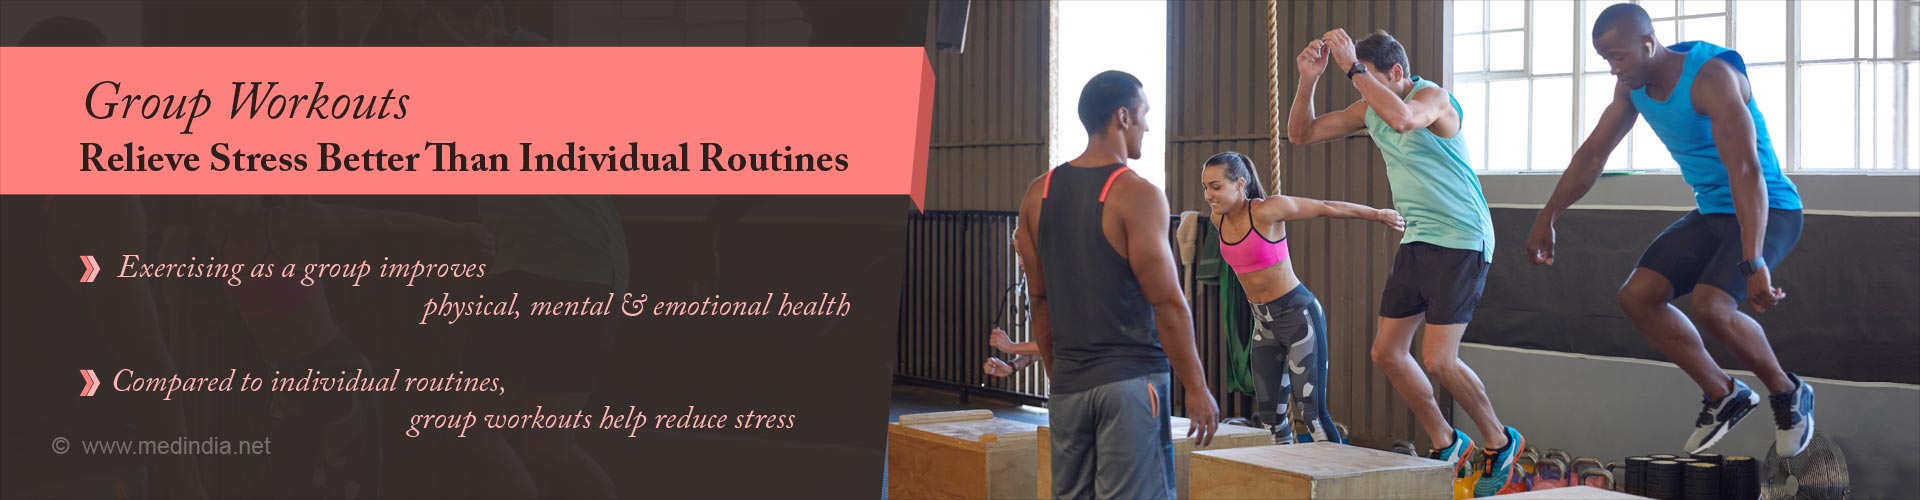 group workouts relieve stress better than individual routines
- exercising as a group improves physical, mental & emotional health
- compared to individual routines, group workouts help reduce stress
